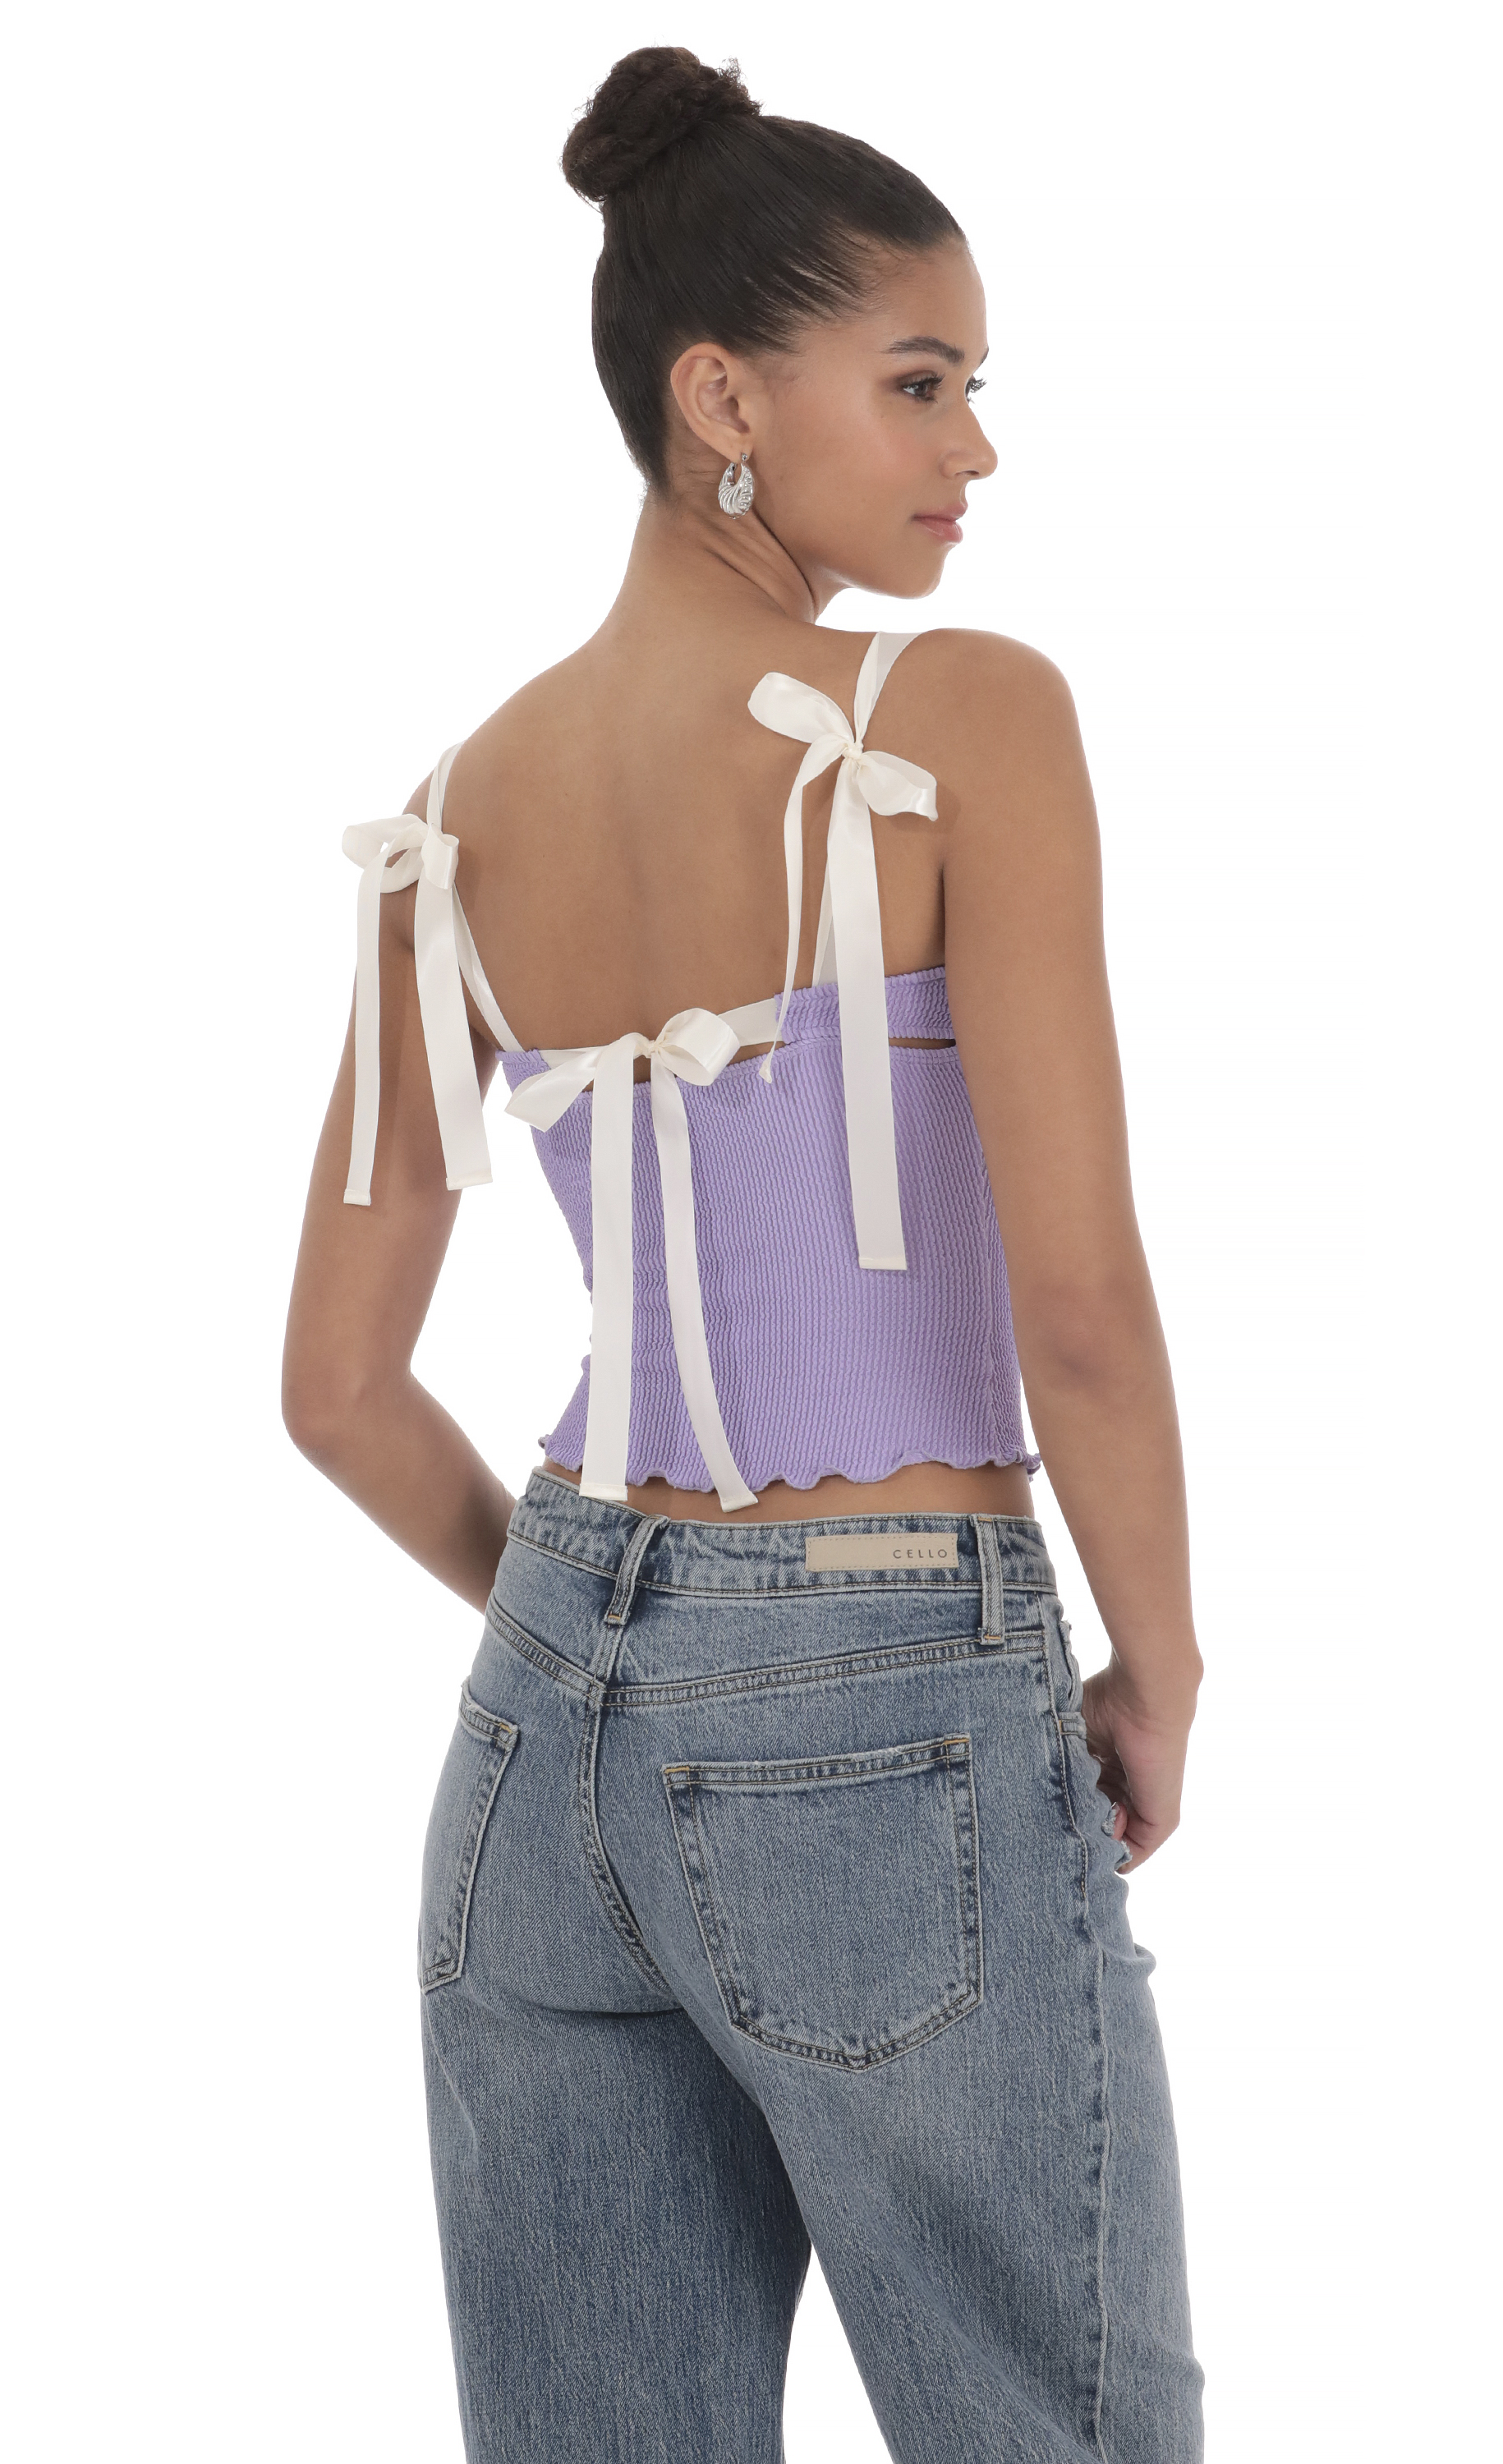 Ribbon Ties Stretch Top in in Lavender